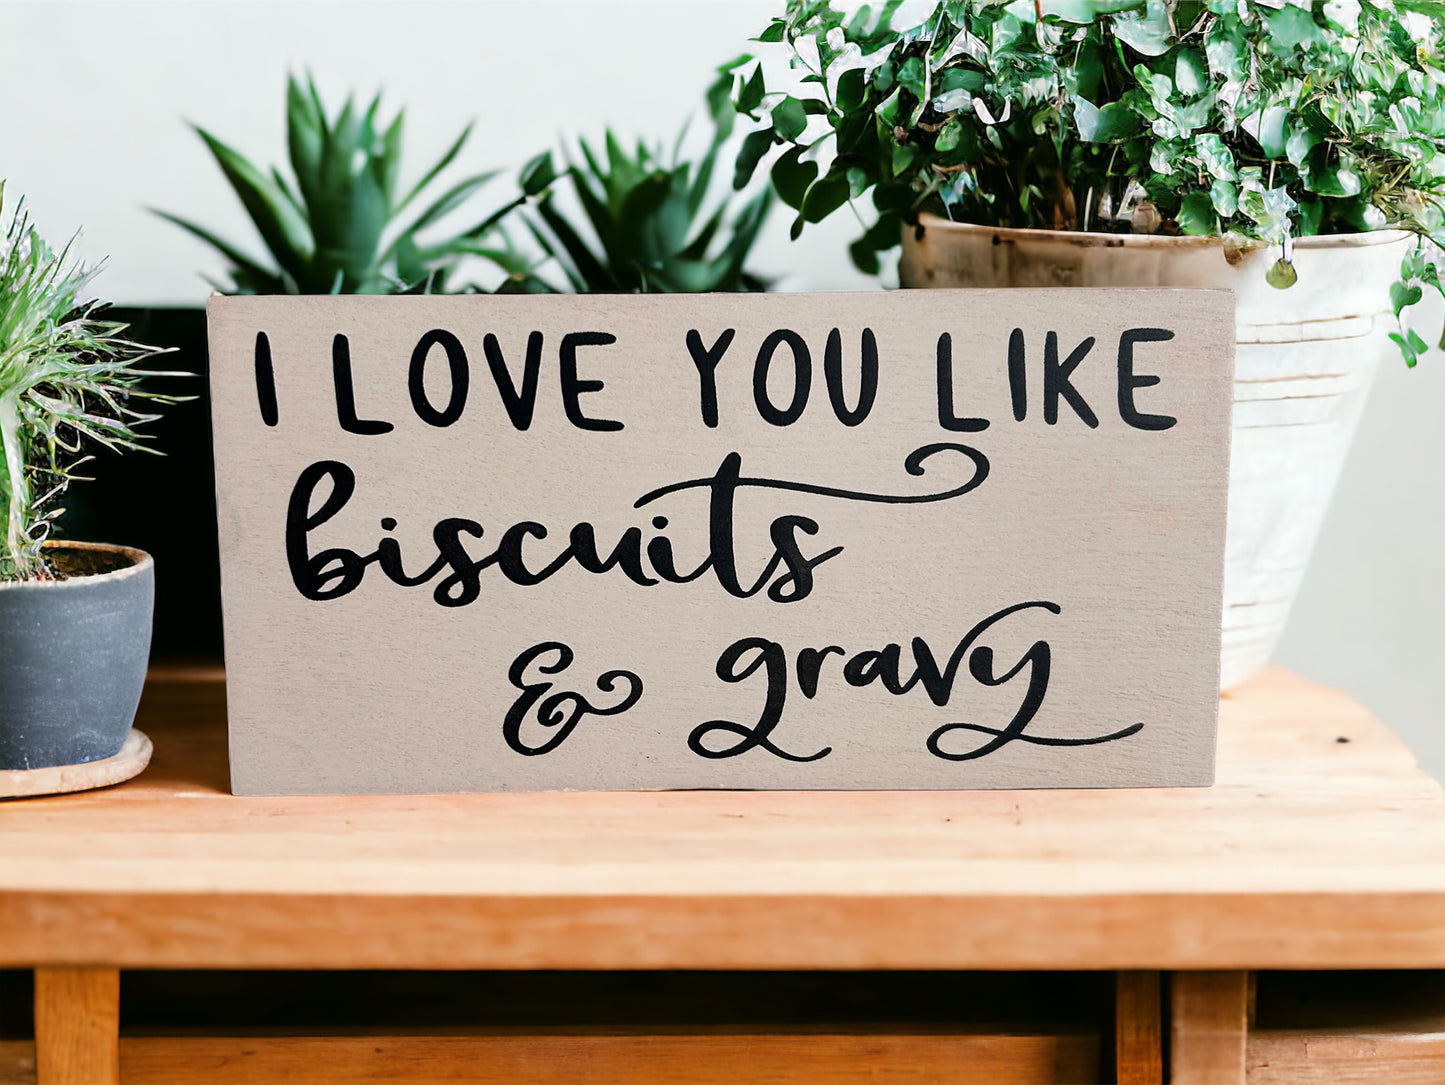 "Biscuits and gravy" Wood sign